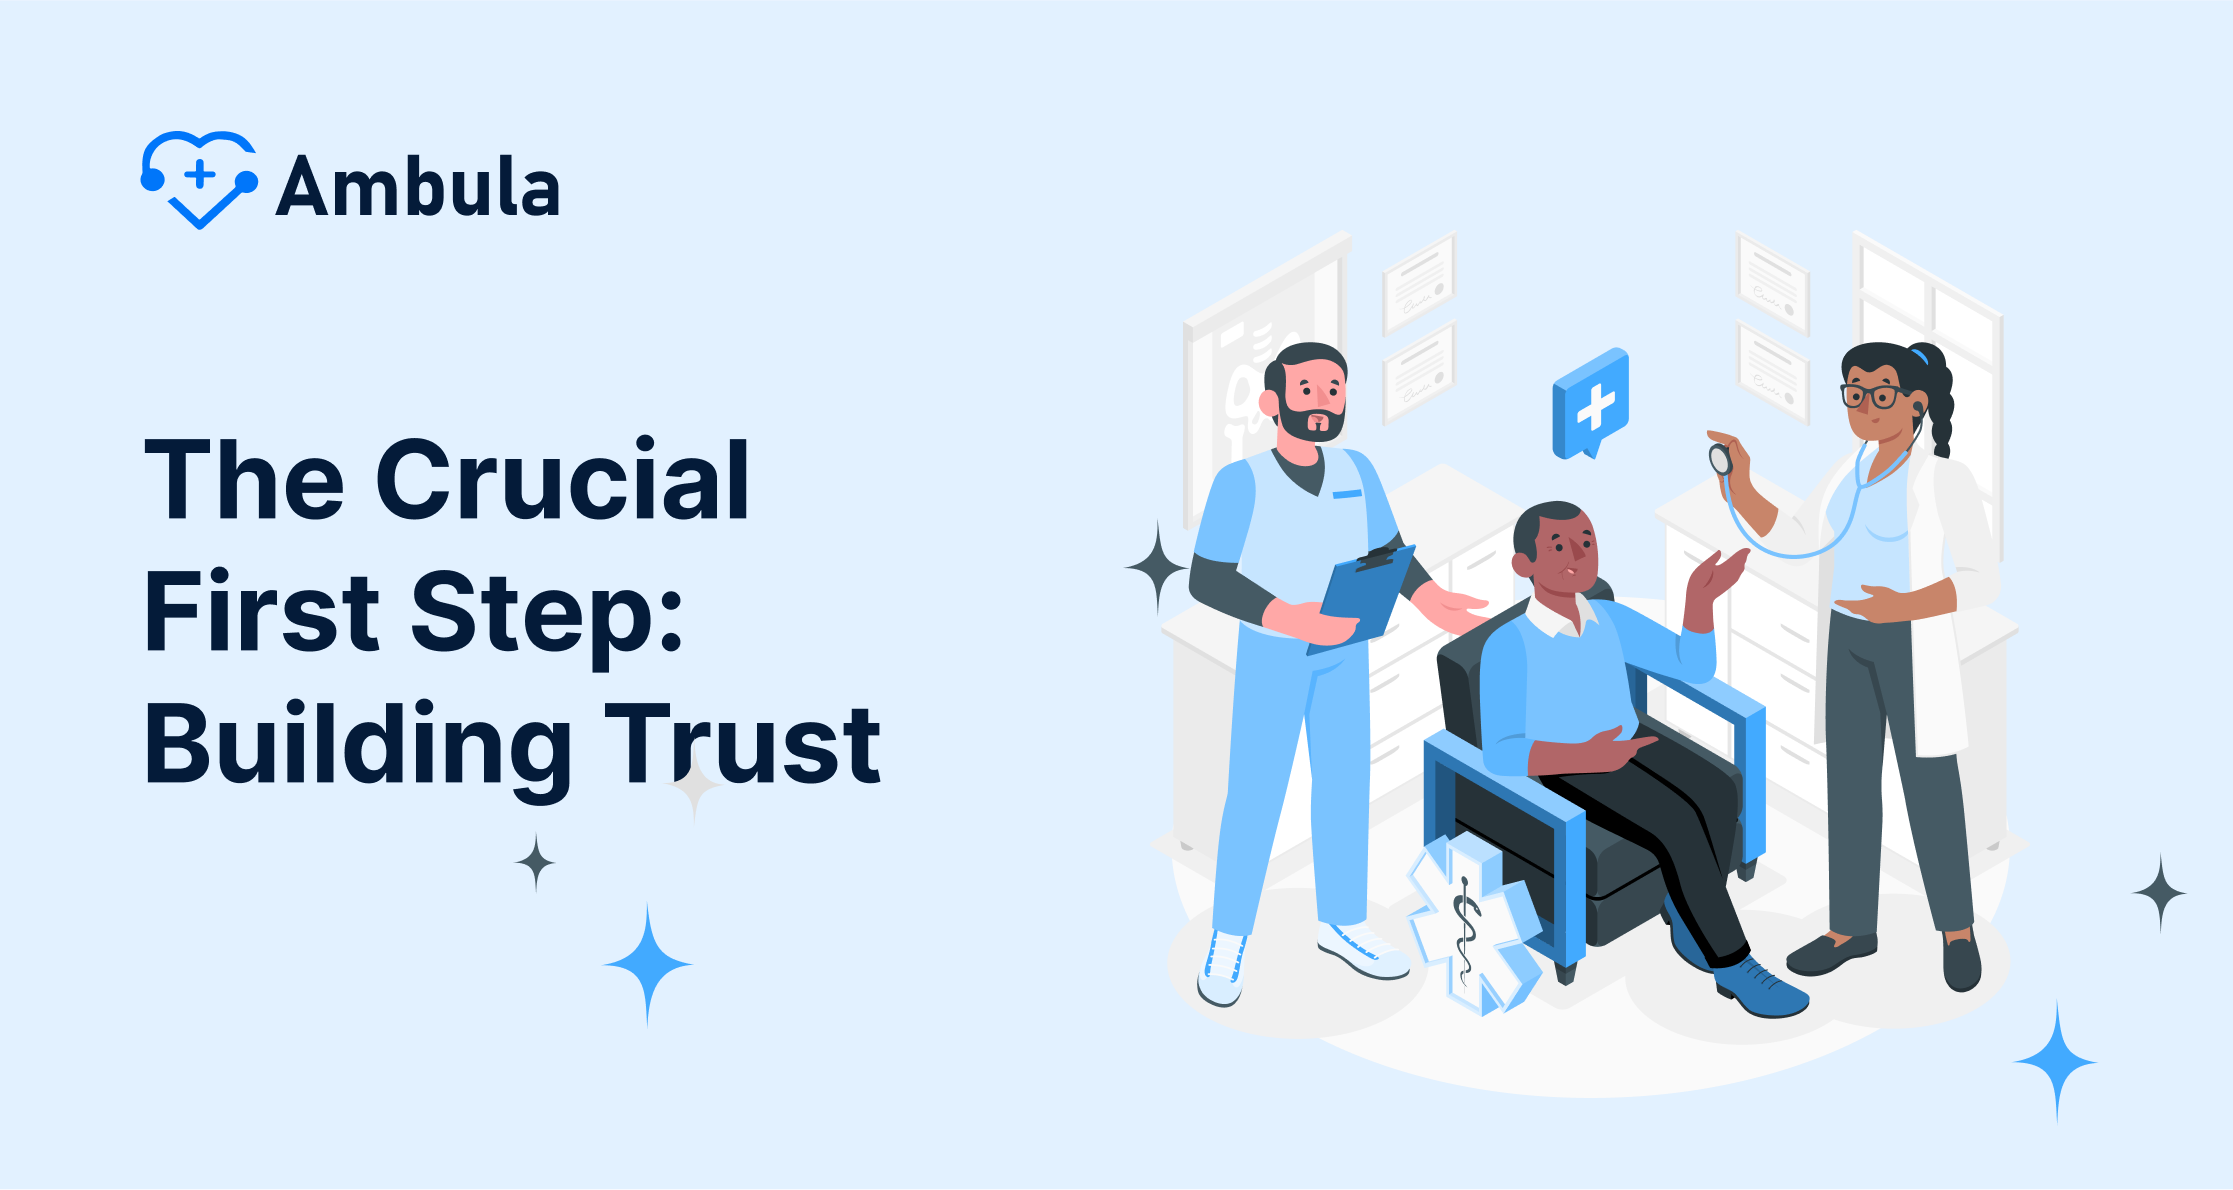 The Crucial First Step: Building Trust